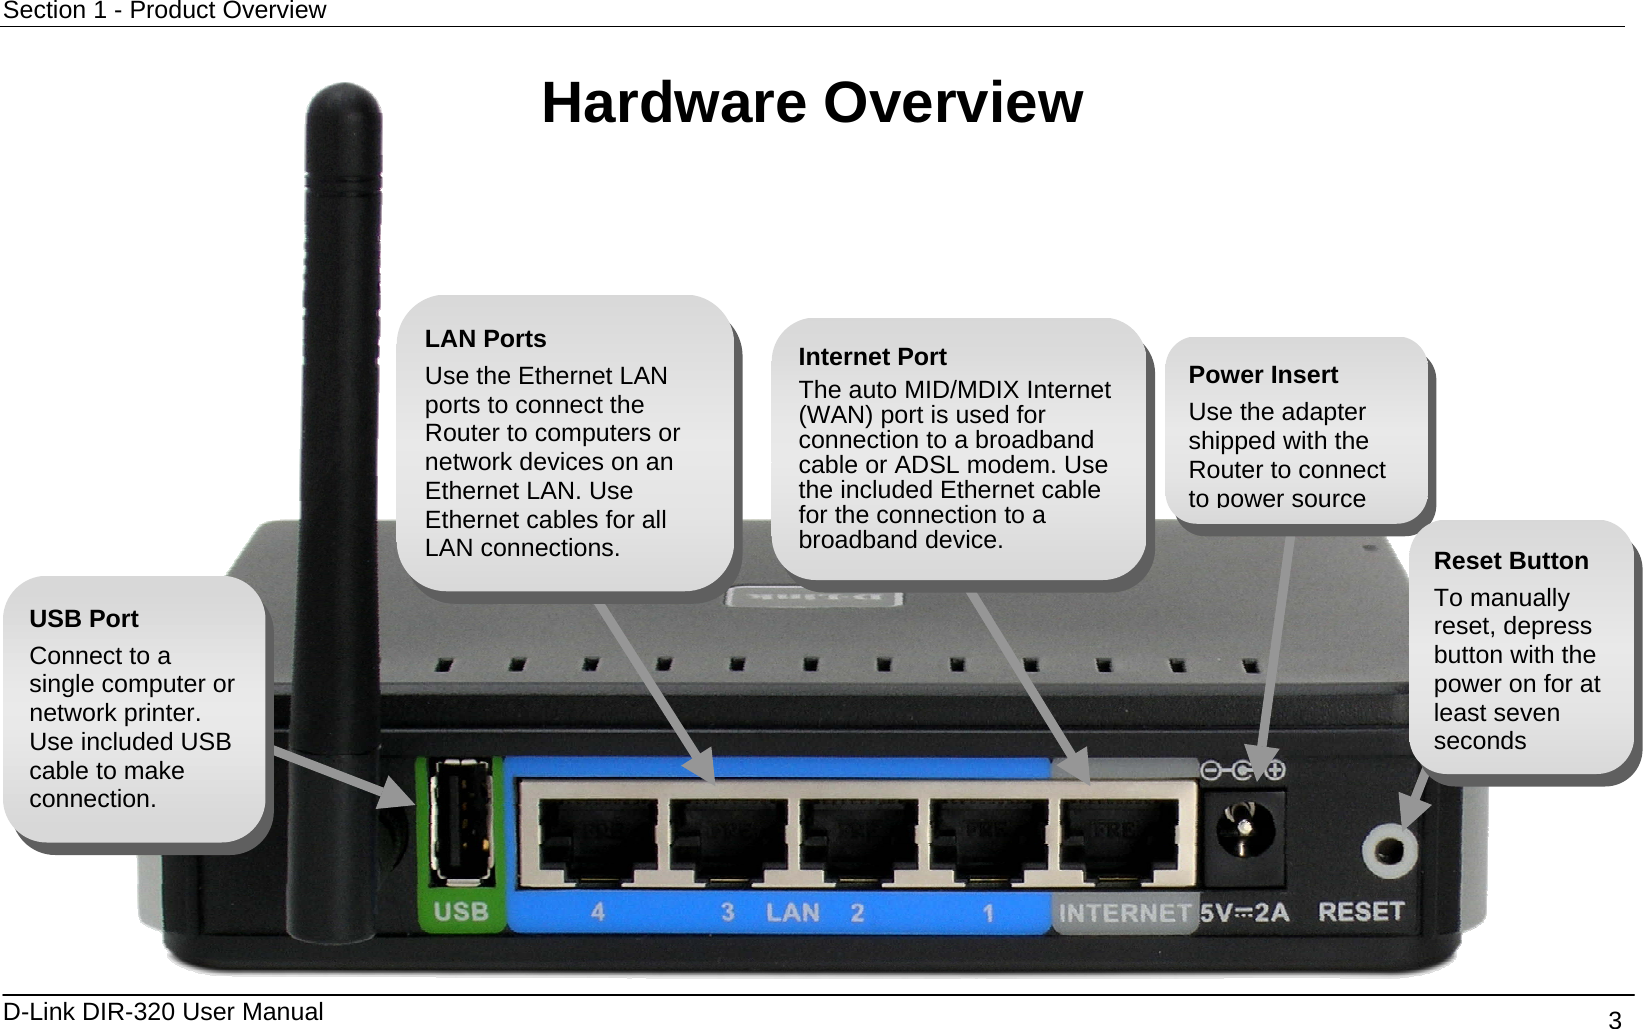 Section 1 - Product Overview  D-Link DIR-320 User Manual                                       3 Hardware Overview                             Power Insert Use the adapter shipped with the Router to connect to power sourceInternet Port The auto MID/MDIX Internet (WAN) port is used for connection to a broadband cable or ADSL modem. Use the included Ethernet cable for the connection to a broadband device. USB Port Connect to a single computer or network printer. Use included USB cable to make connection. LAN Ports Use the Ethernet LAN ports to connect the Router to computers or network devices on an Ethernet LAN. Use Ethernet cables for all LAN connections. Reset Button To manually reset, depress button with the power on for at least seven seconds 